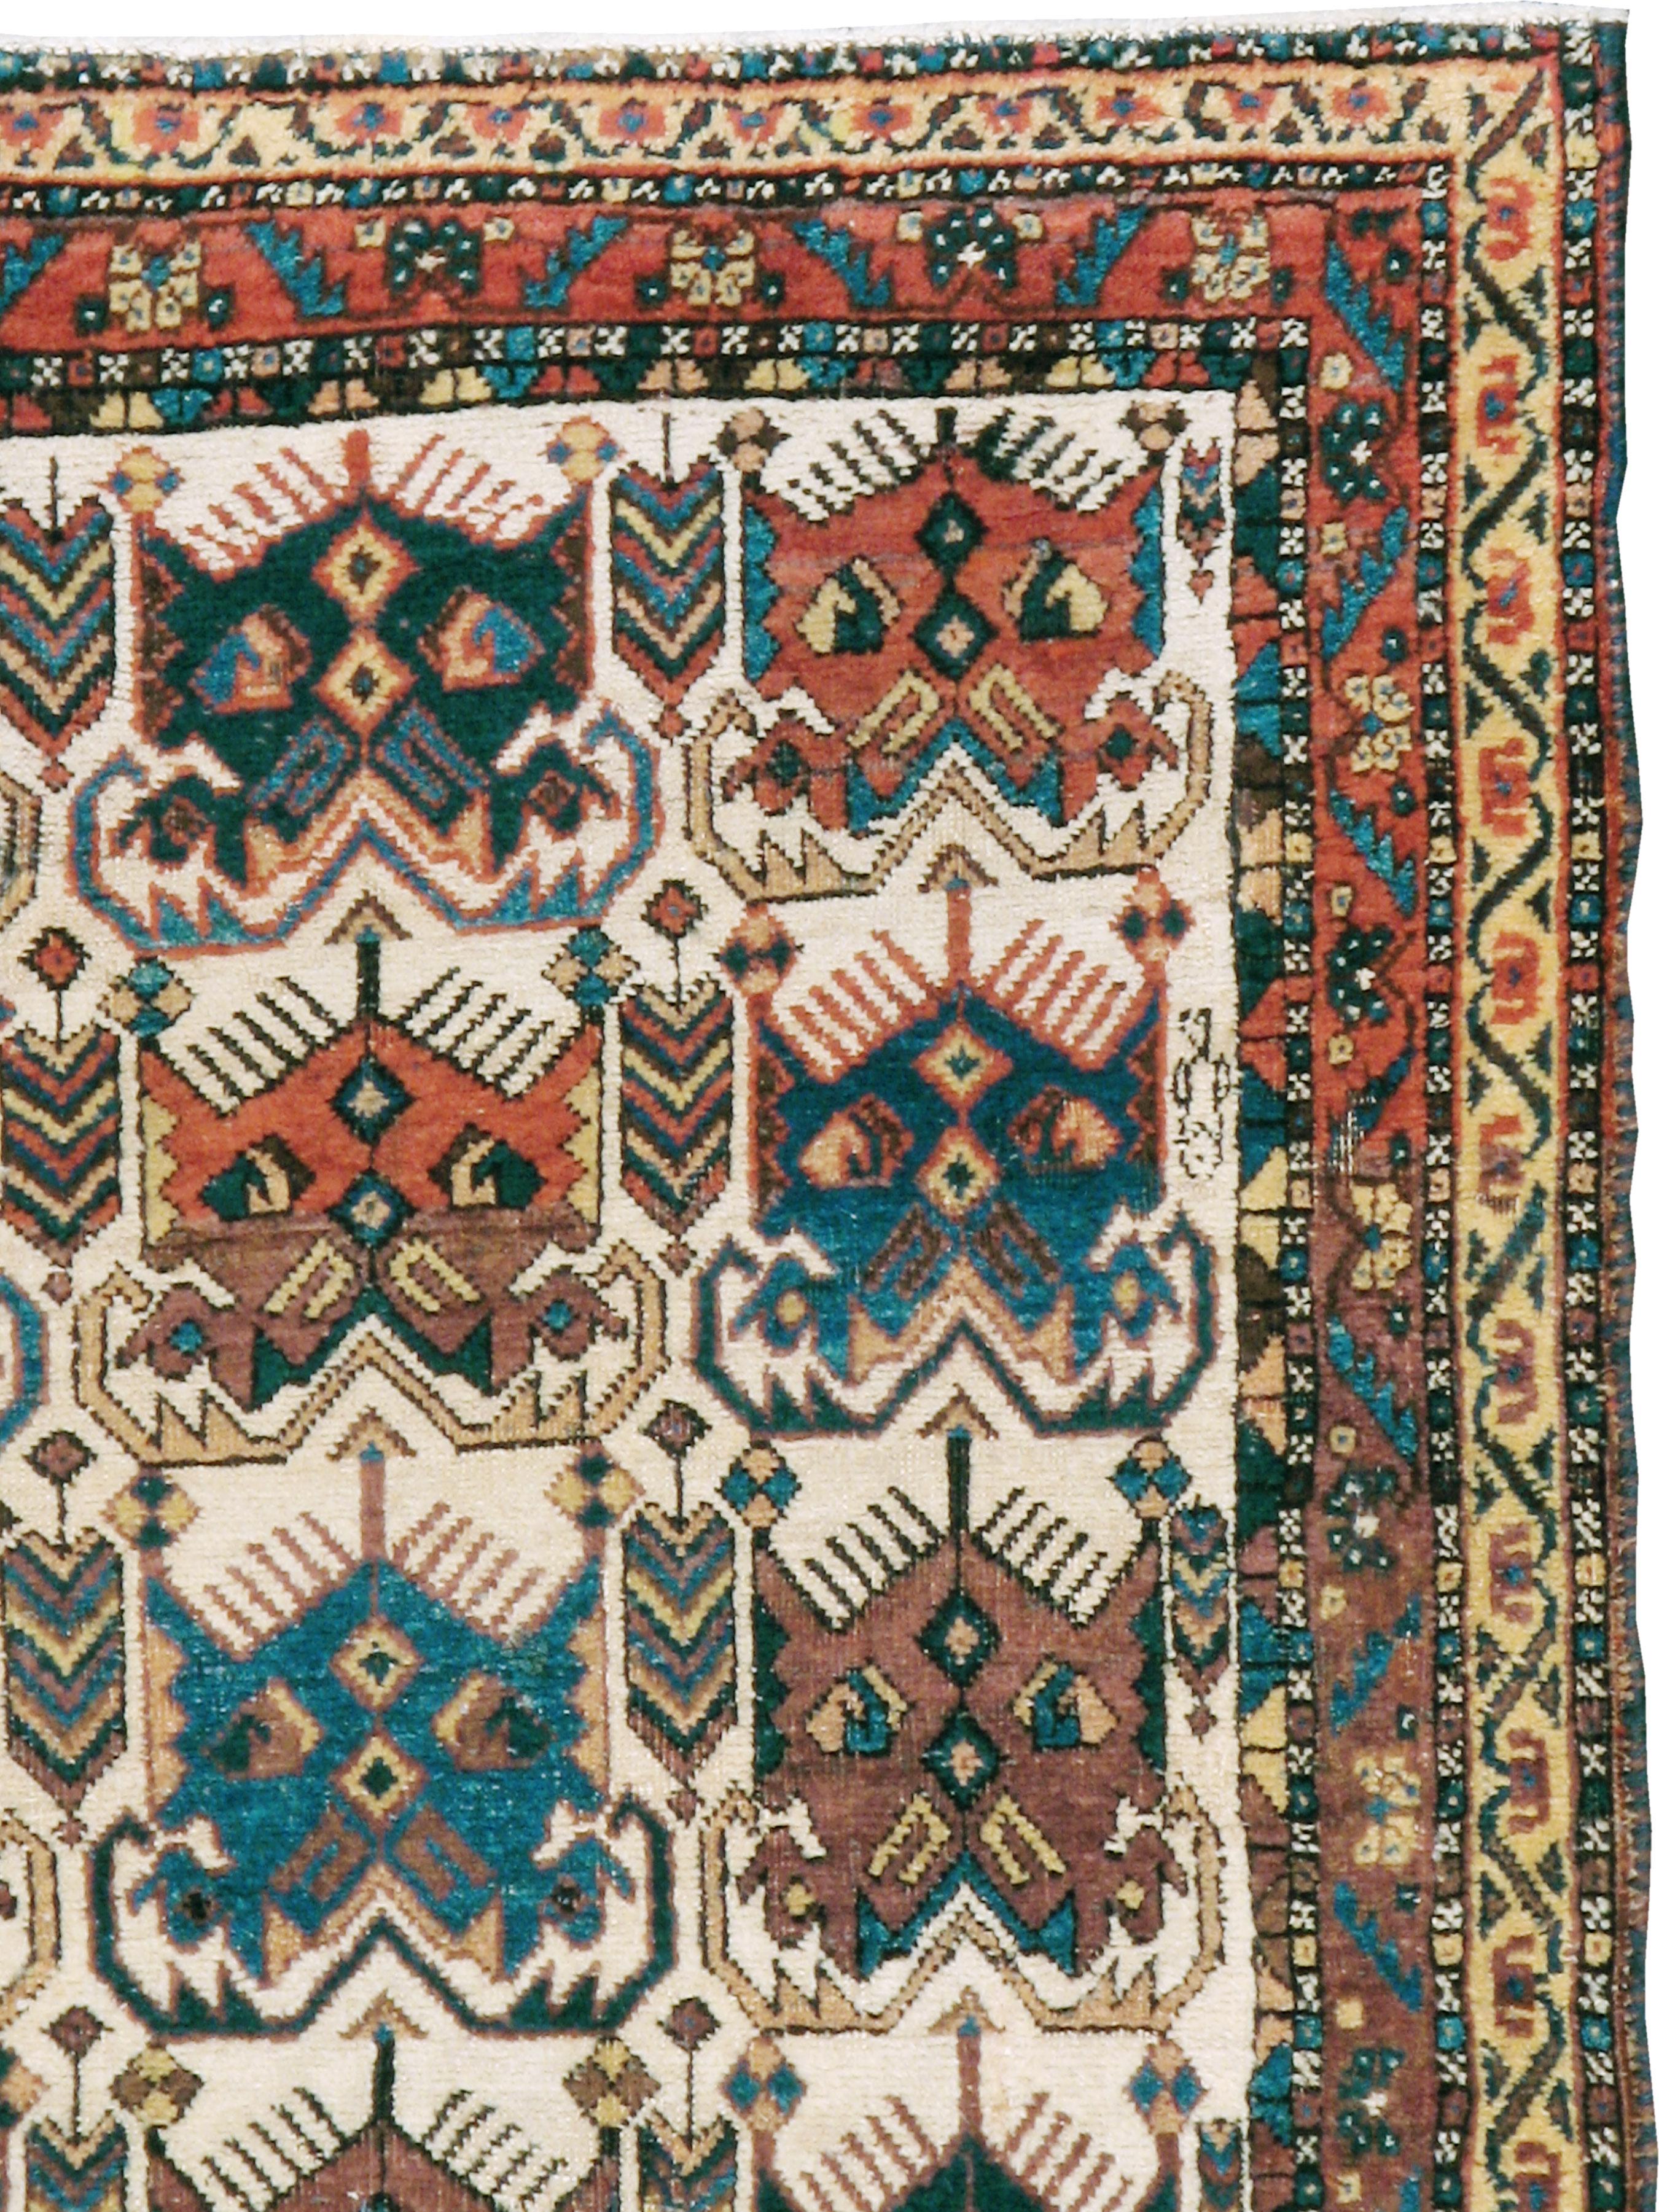 An antique Persian Afshar rug from the early 20th century. Vaguely insectoid unidirectional palmettes in mostly red and blue are displayed in seven rows on the ivory ground. This is a classic SE Persian Afshar design seen on saddlebags and scatter